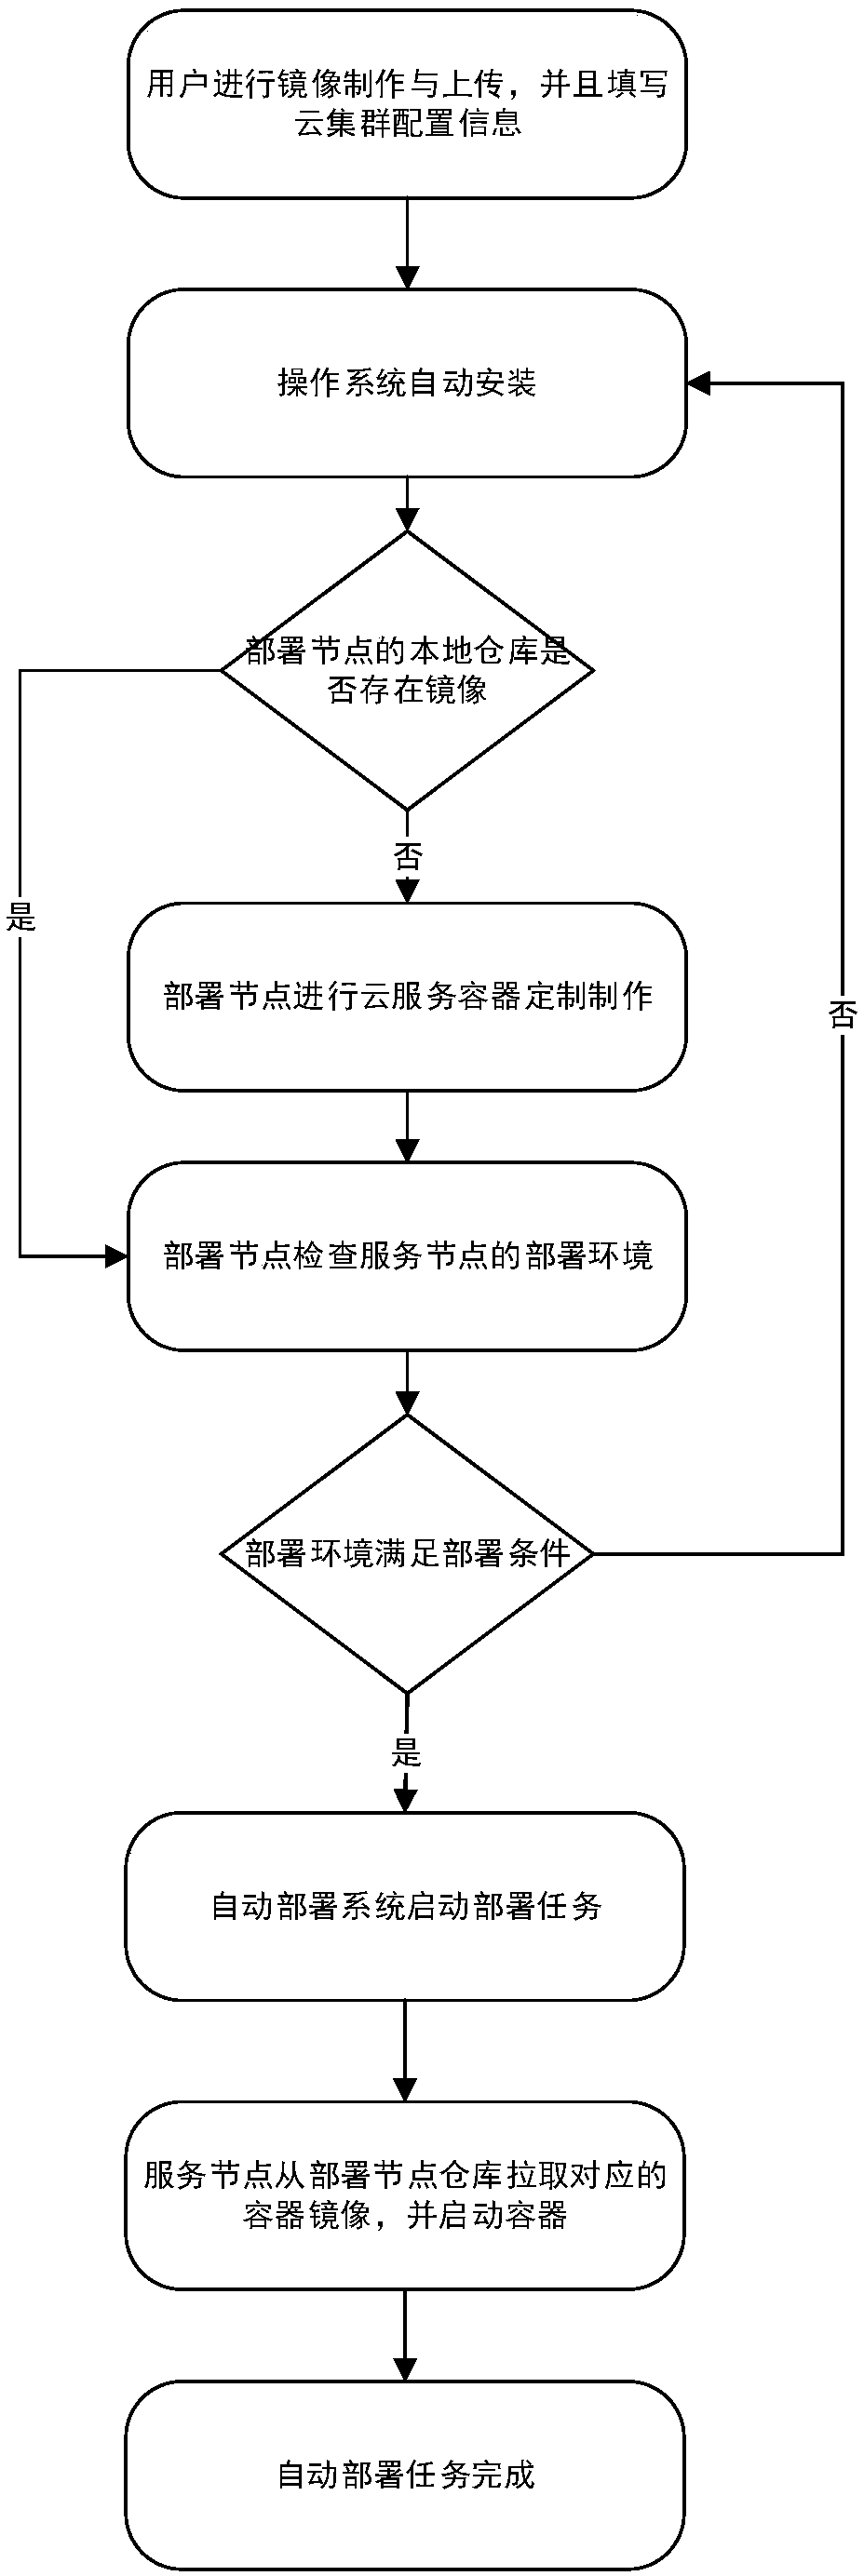 Automatic deployment method for distributed cloud system